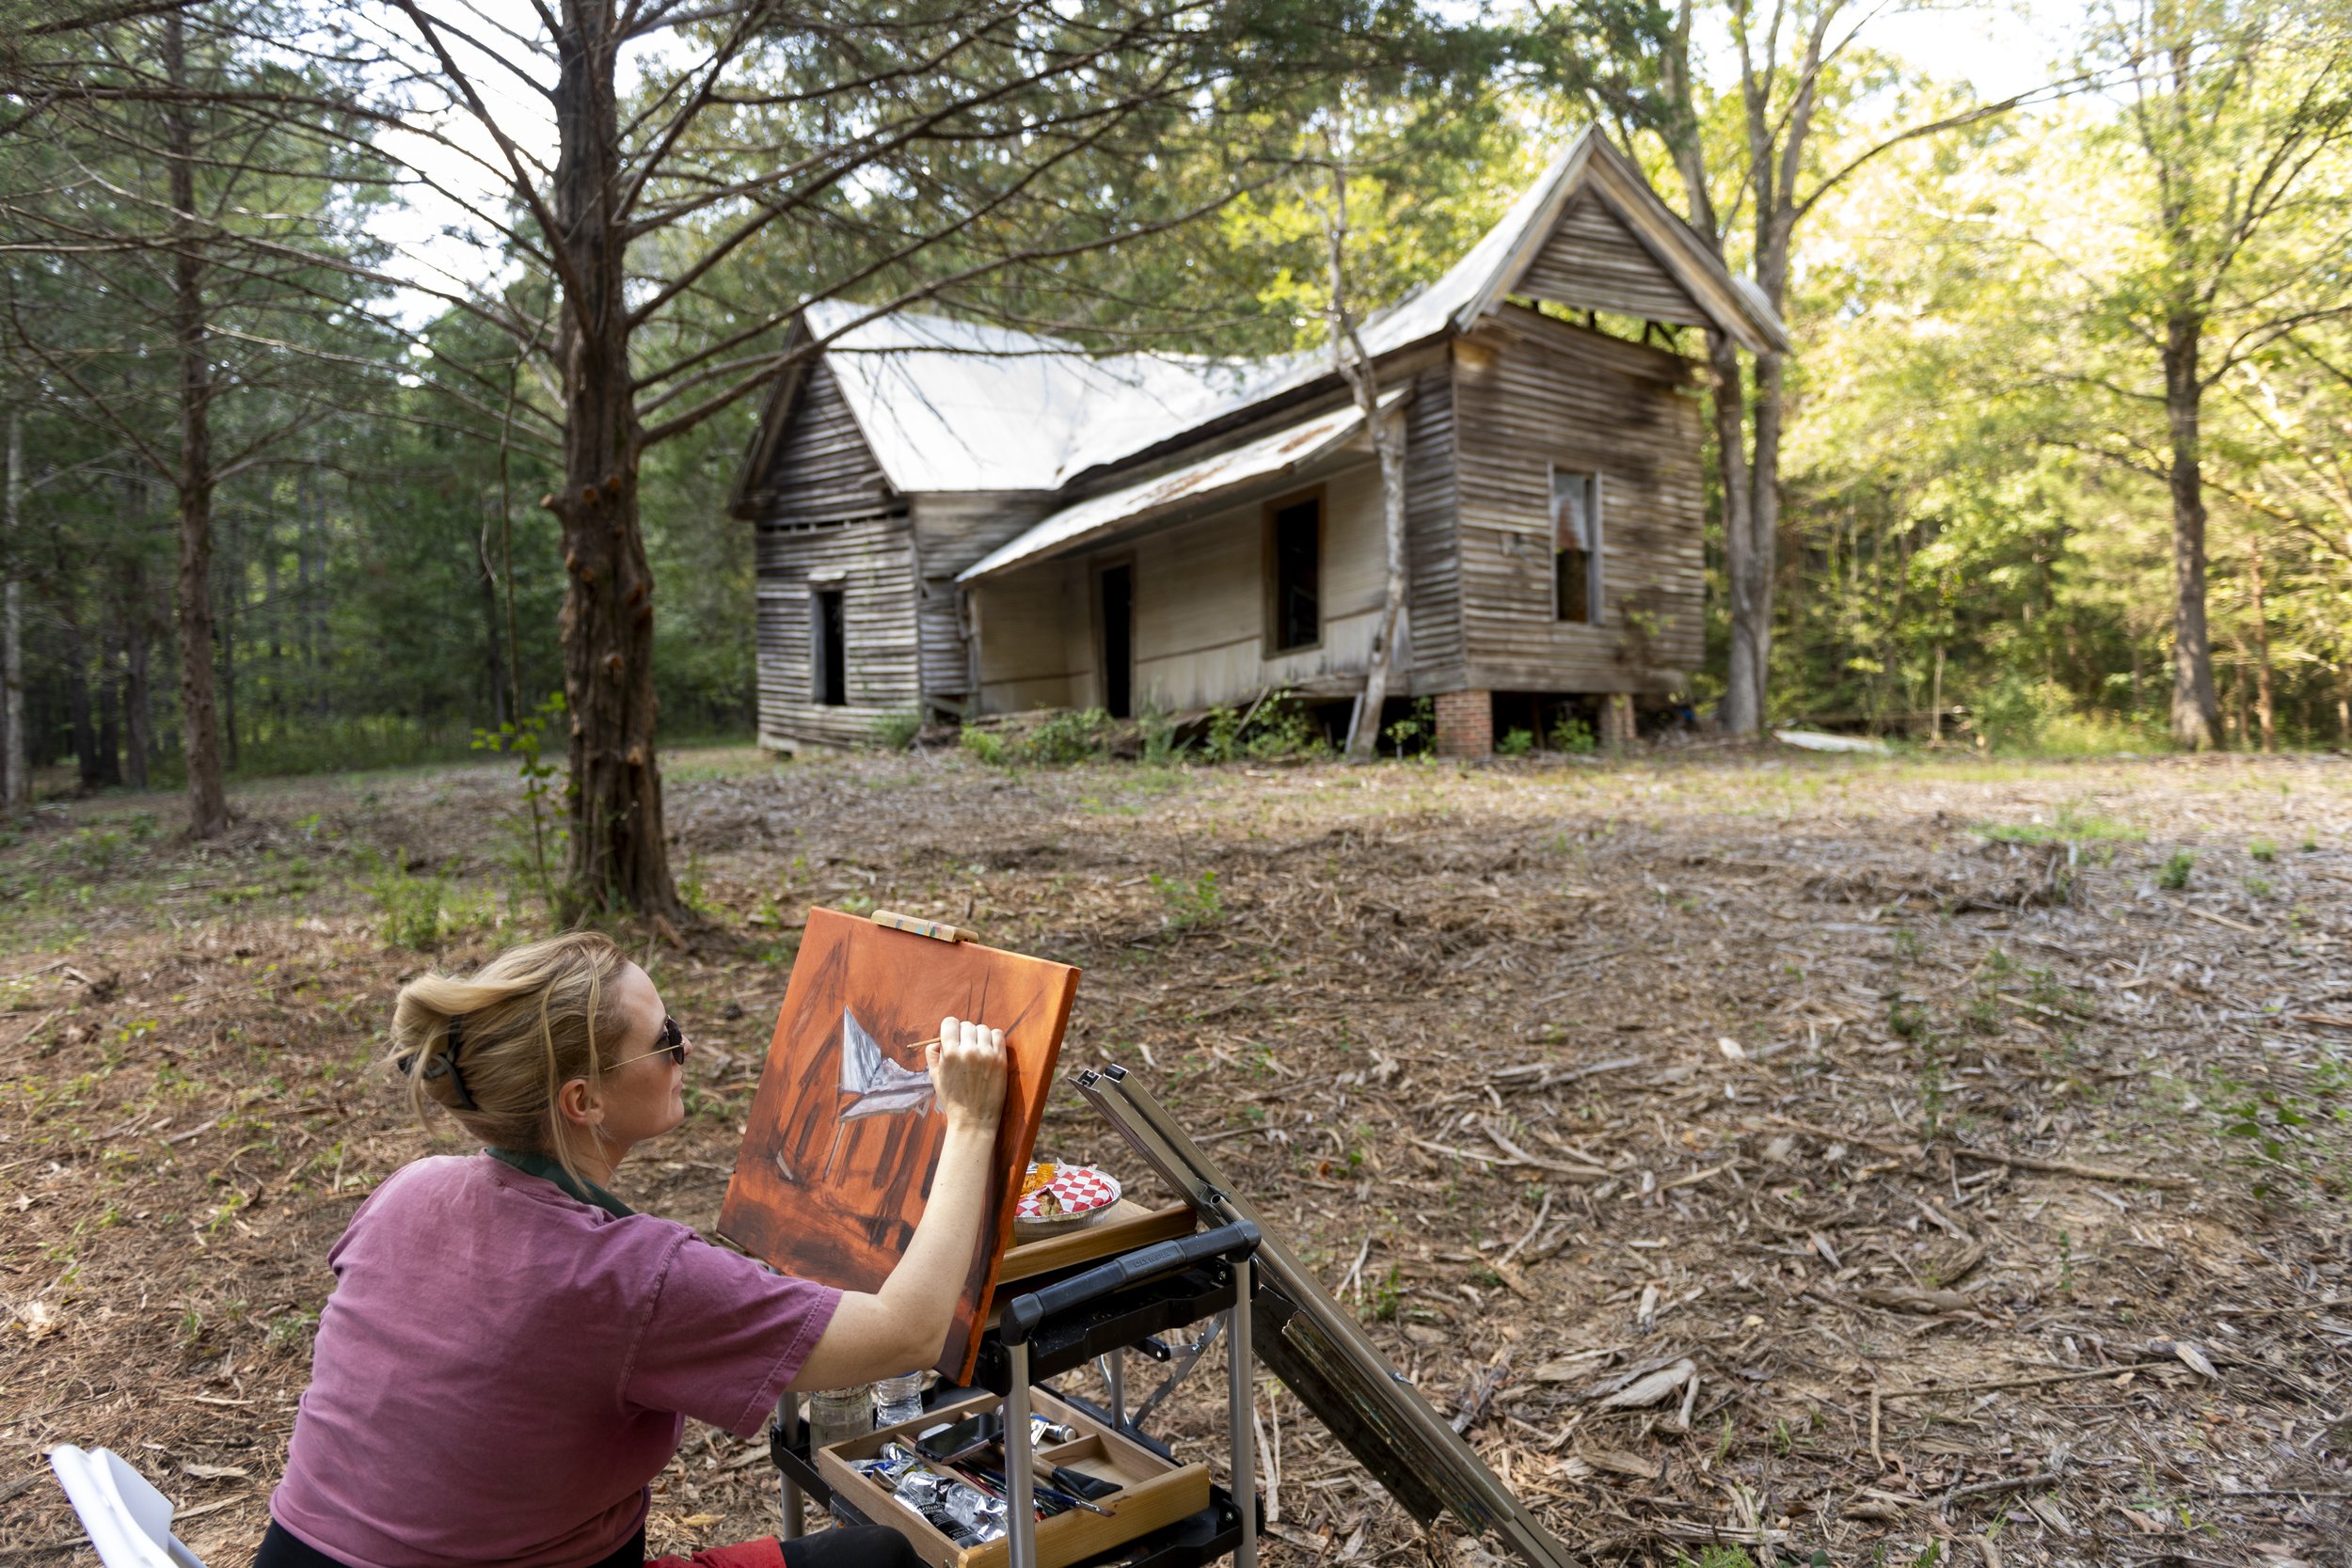  Nine Mississippi artists participate in Plein Air Painting Competition at Greenfield Farm on Sept. 17, 2023. Hannah McCormick, a graduate of the University of Mississippi who paints and teaches in Water Valley. Photo by Srijita Chattopadhyay/ Ole Mi